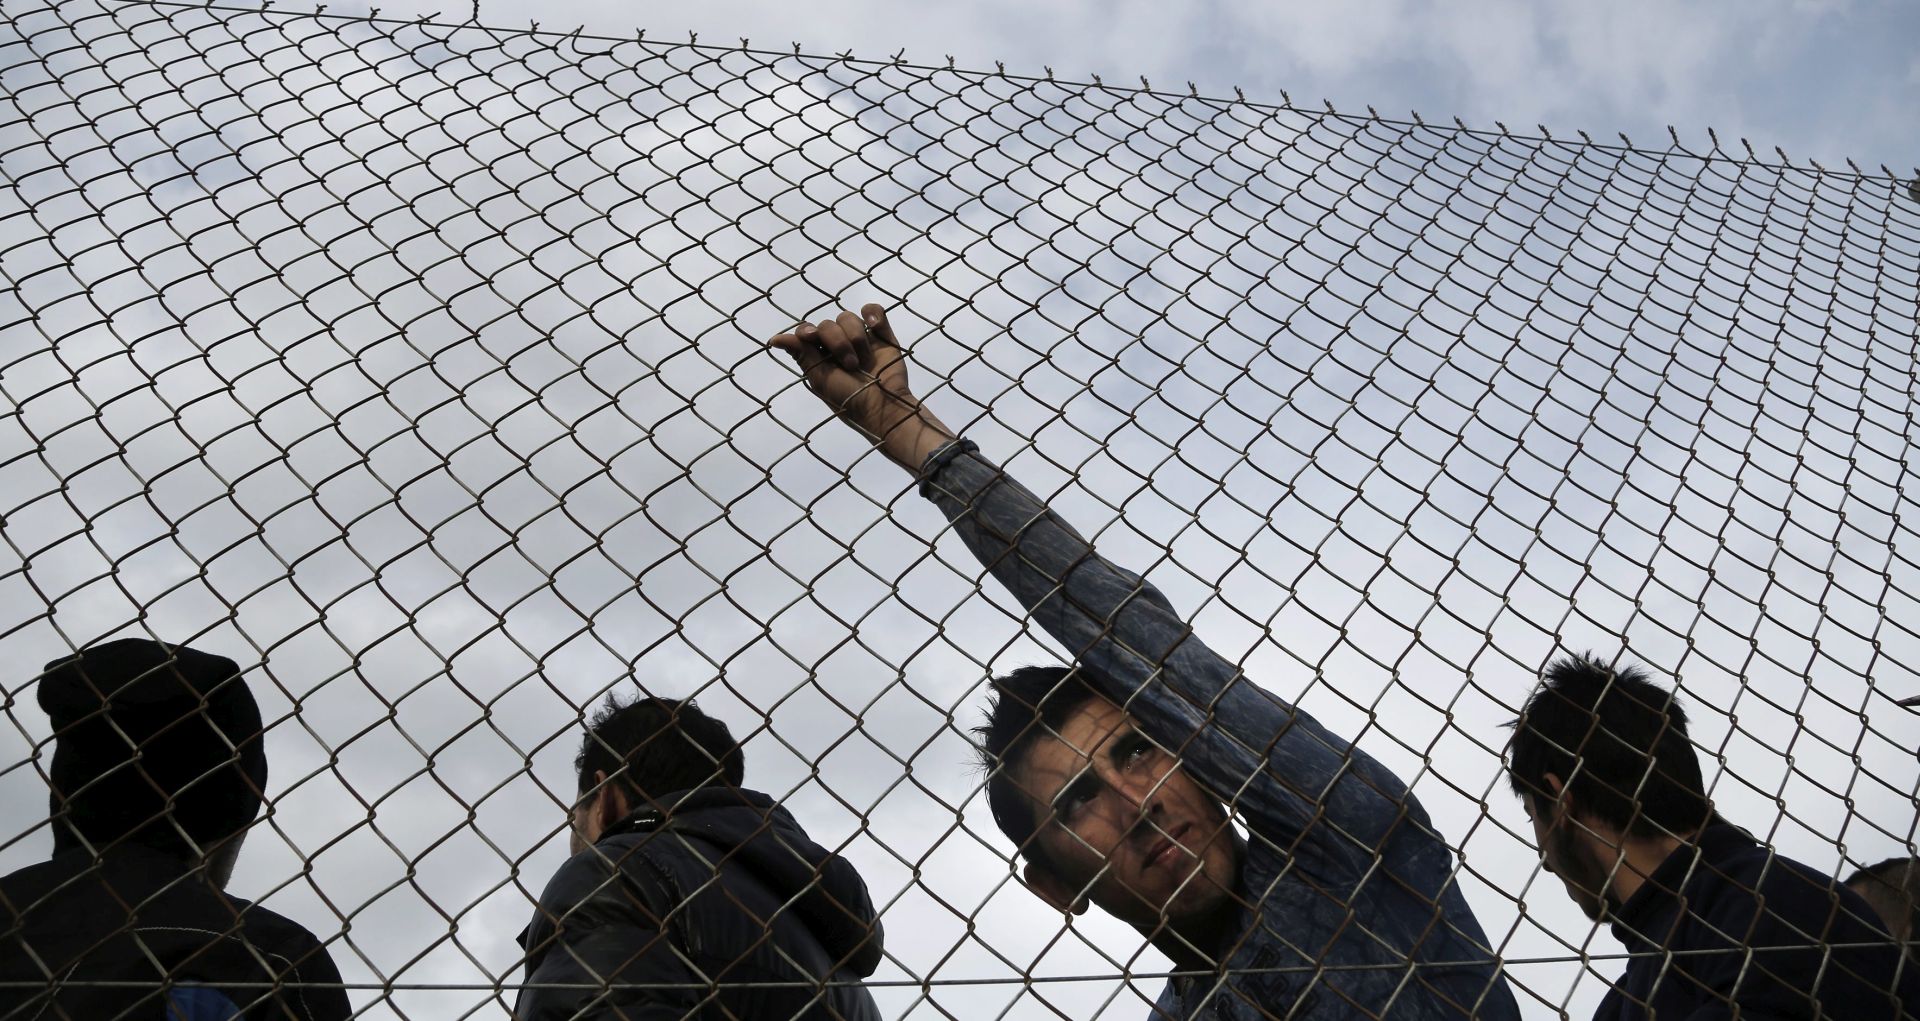 epa05070066 A refugee gazes through the links of a fence while waiting for food to be distributed on the grounds of the former Olympic TAE-KWON-DO Stadium in Athens, Greece, 15 December 2015. The refugees, who are temporarily housed in the stadium, were earlier removed by the Greek Police from Idomeni, north Greece, after being rejected entry to FYROM as economic migrants. Around 800,000 migrants and refugees are estimated to have arrived in Greece since the beginning of the year, with most moving on - sometimes unhindered - to wealthy northern European countries.  EPA/YANNIS KOLESIDIS